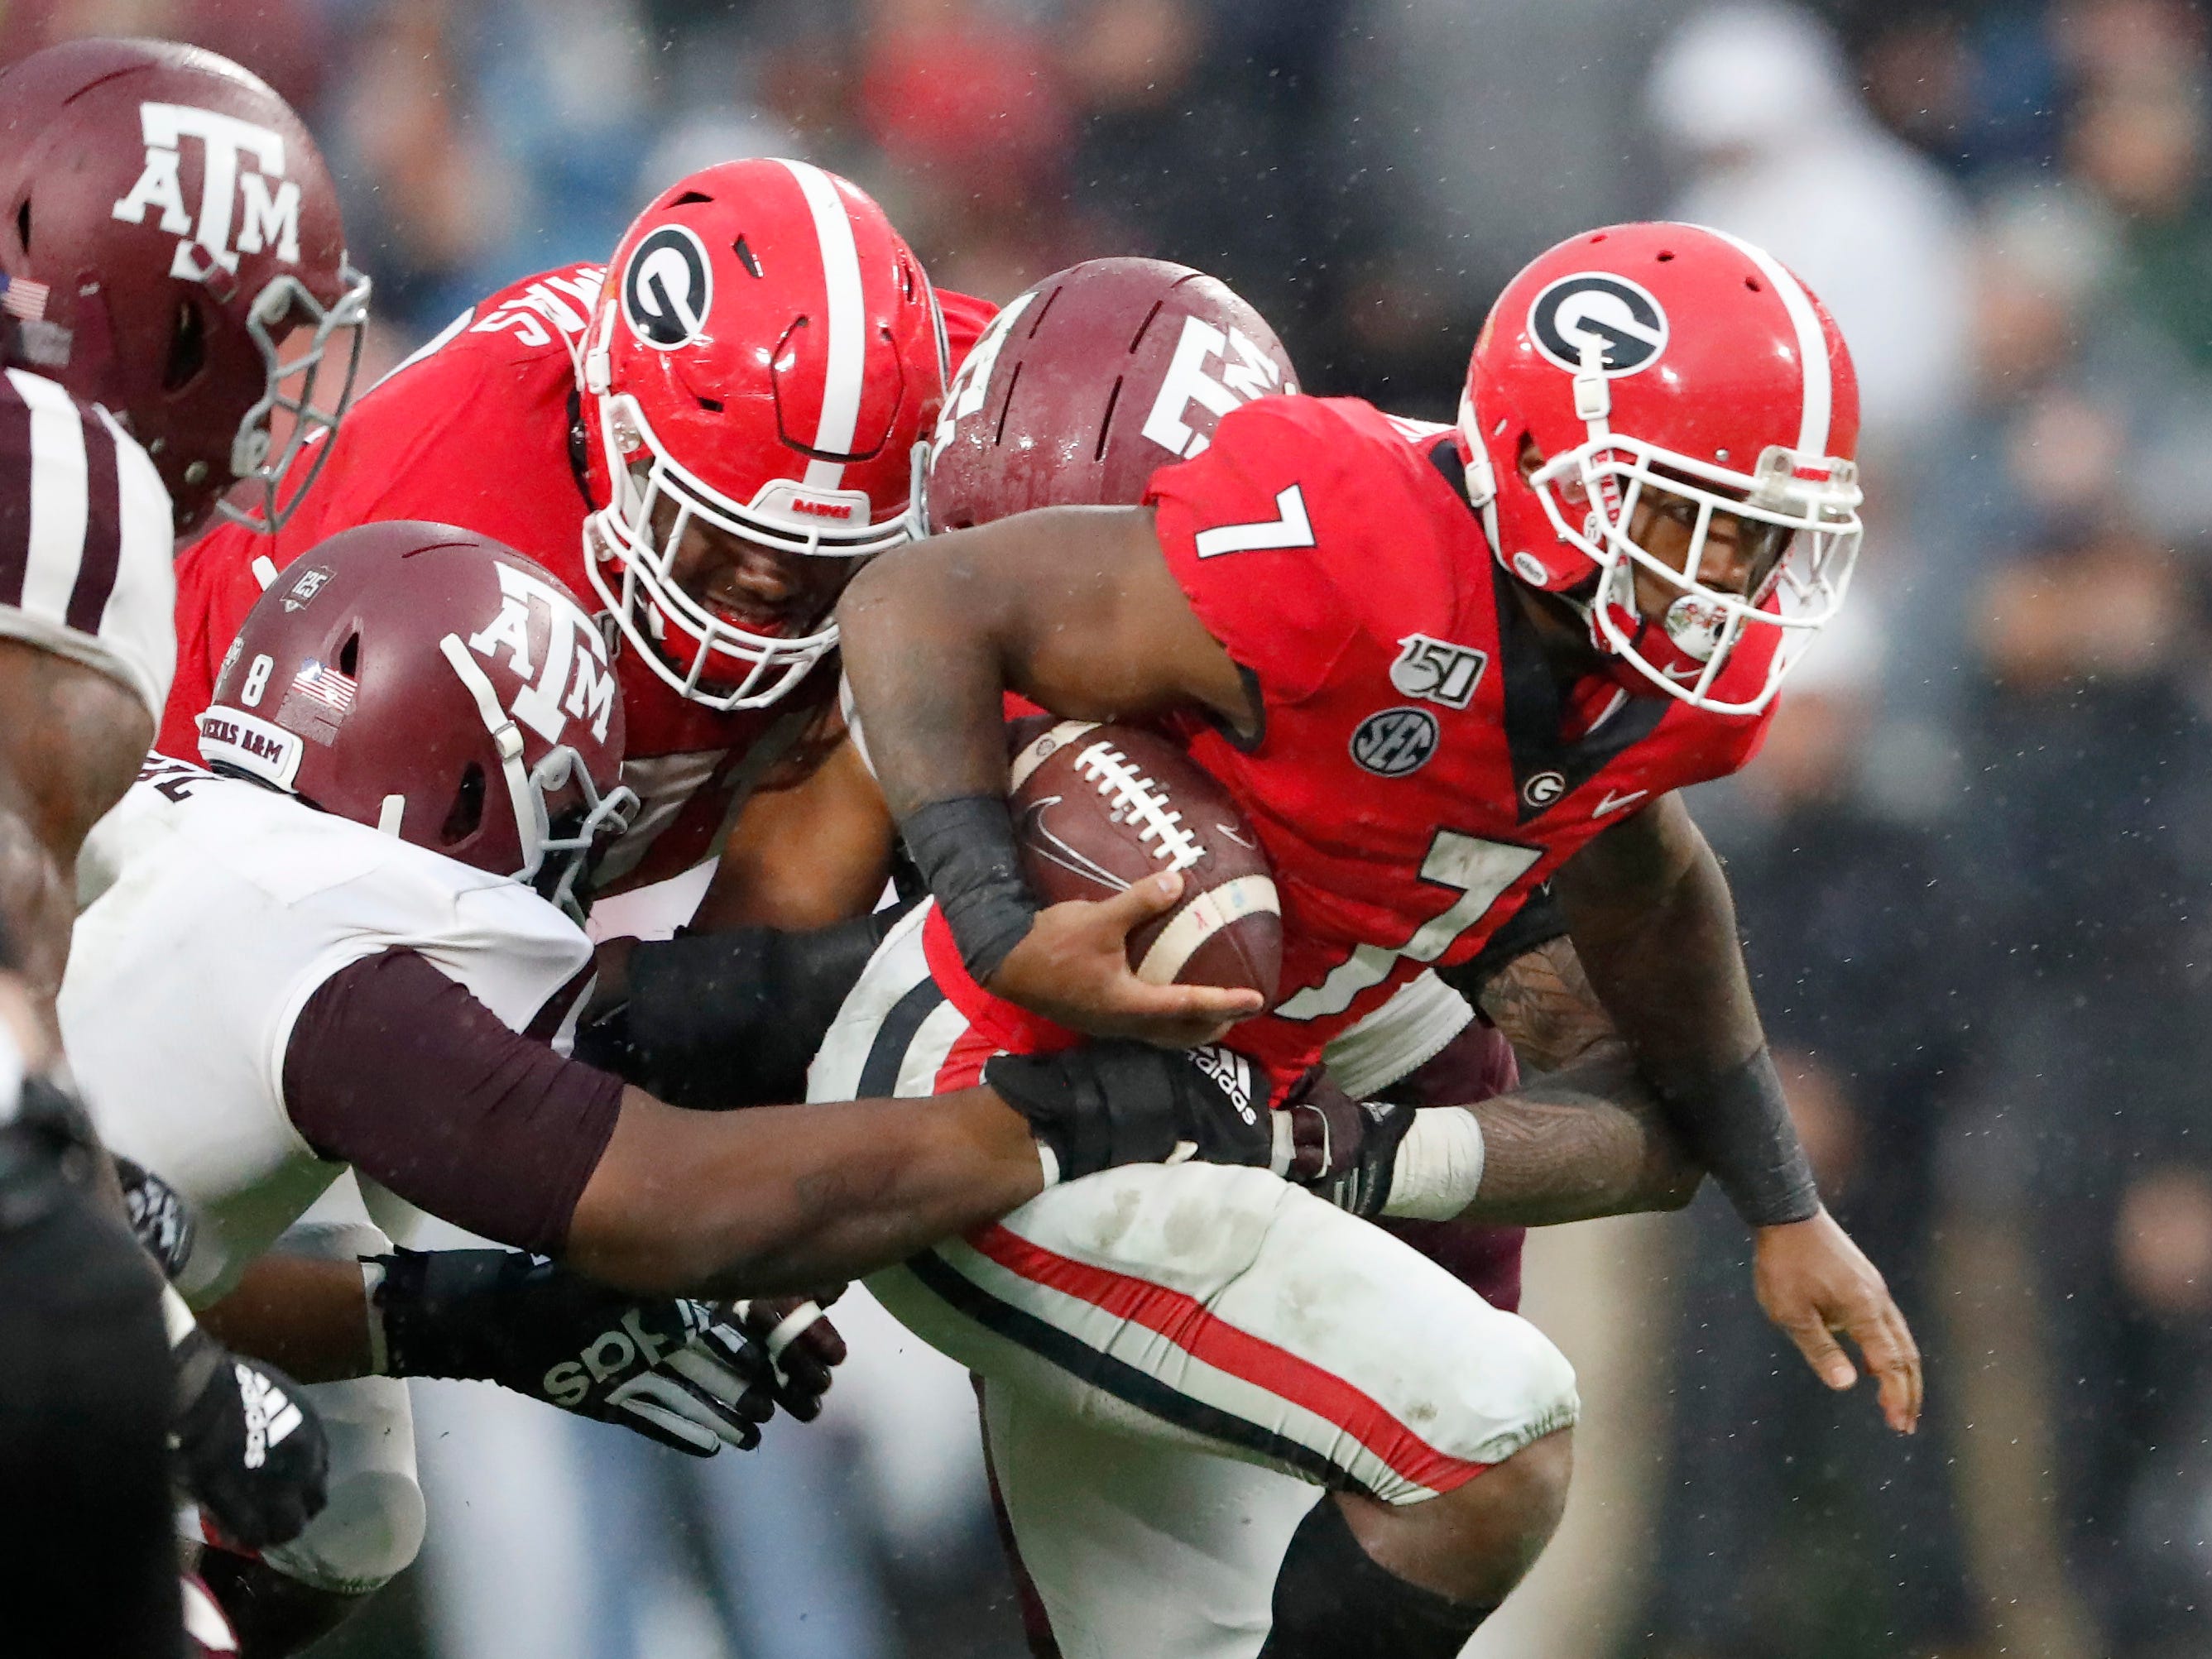 Georgia running back D'Andre Swift struggles for extra yardage against Texas A&M.